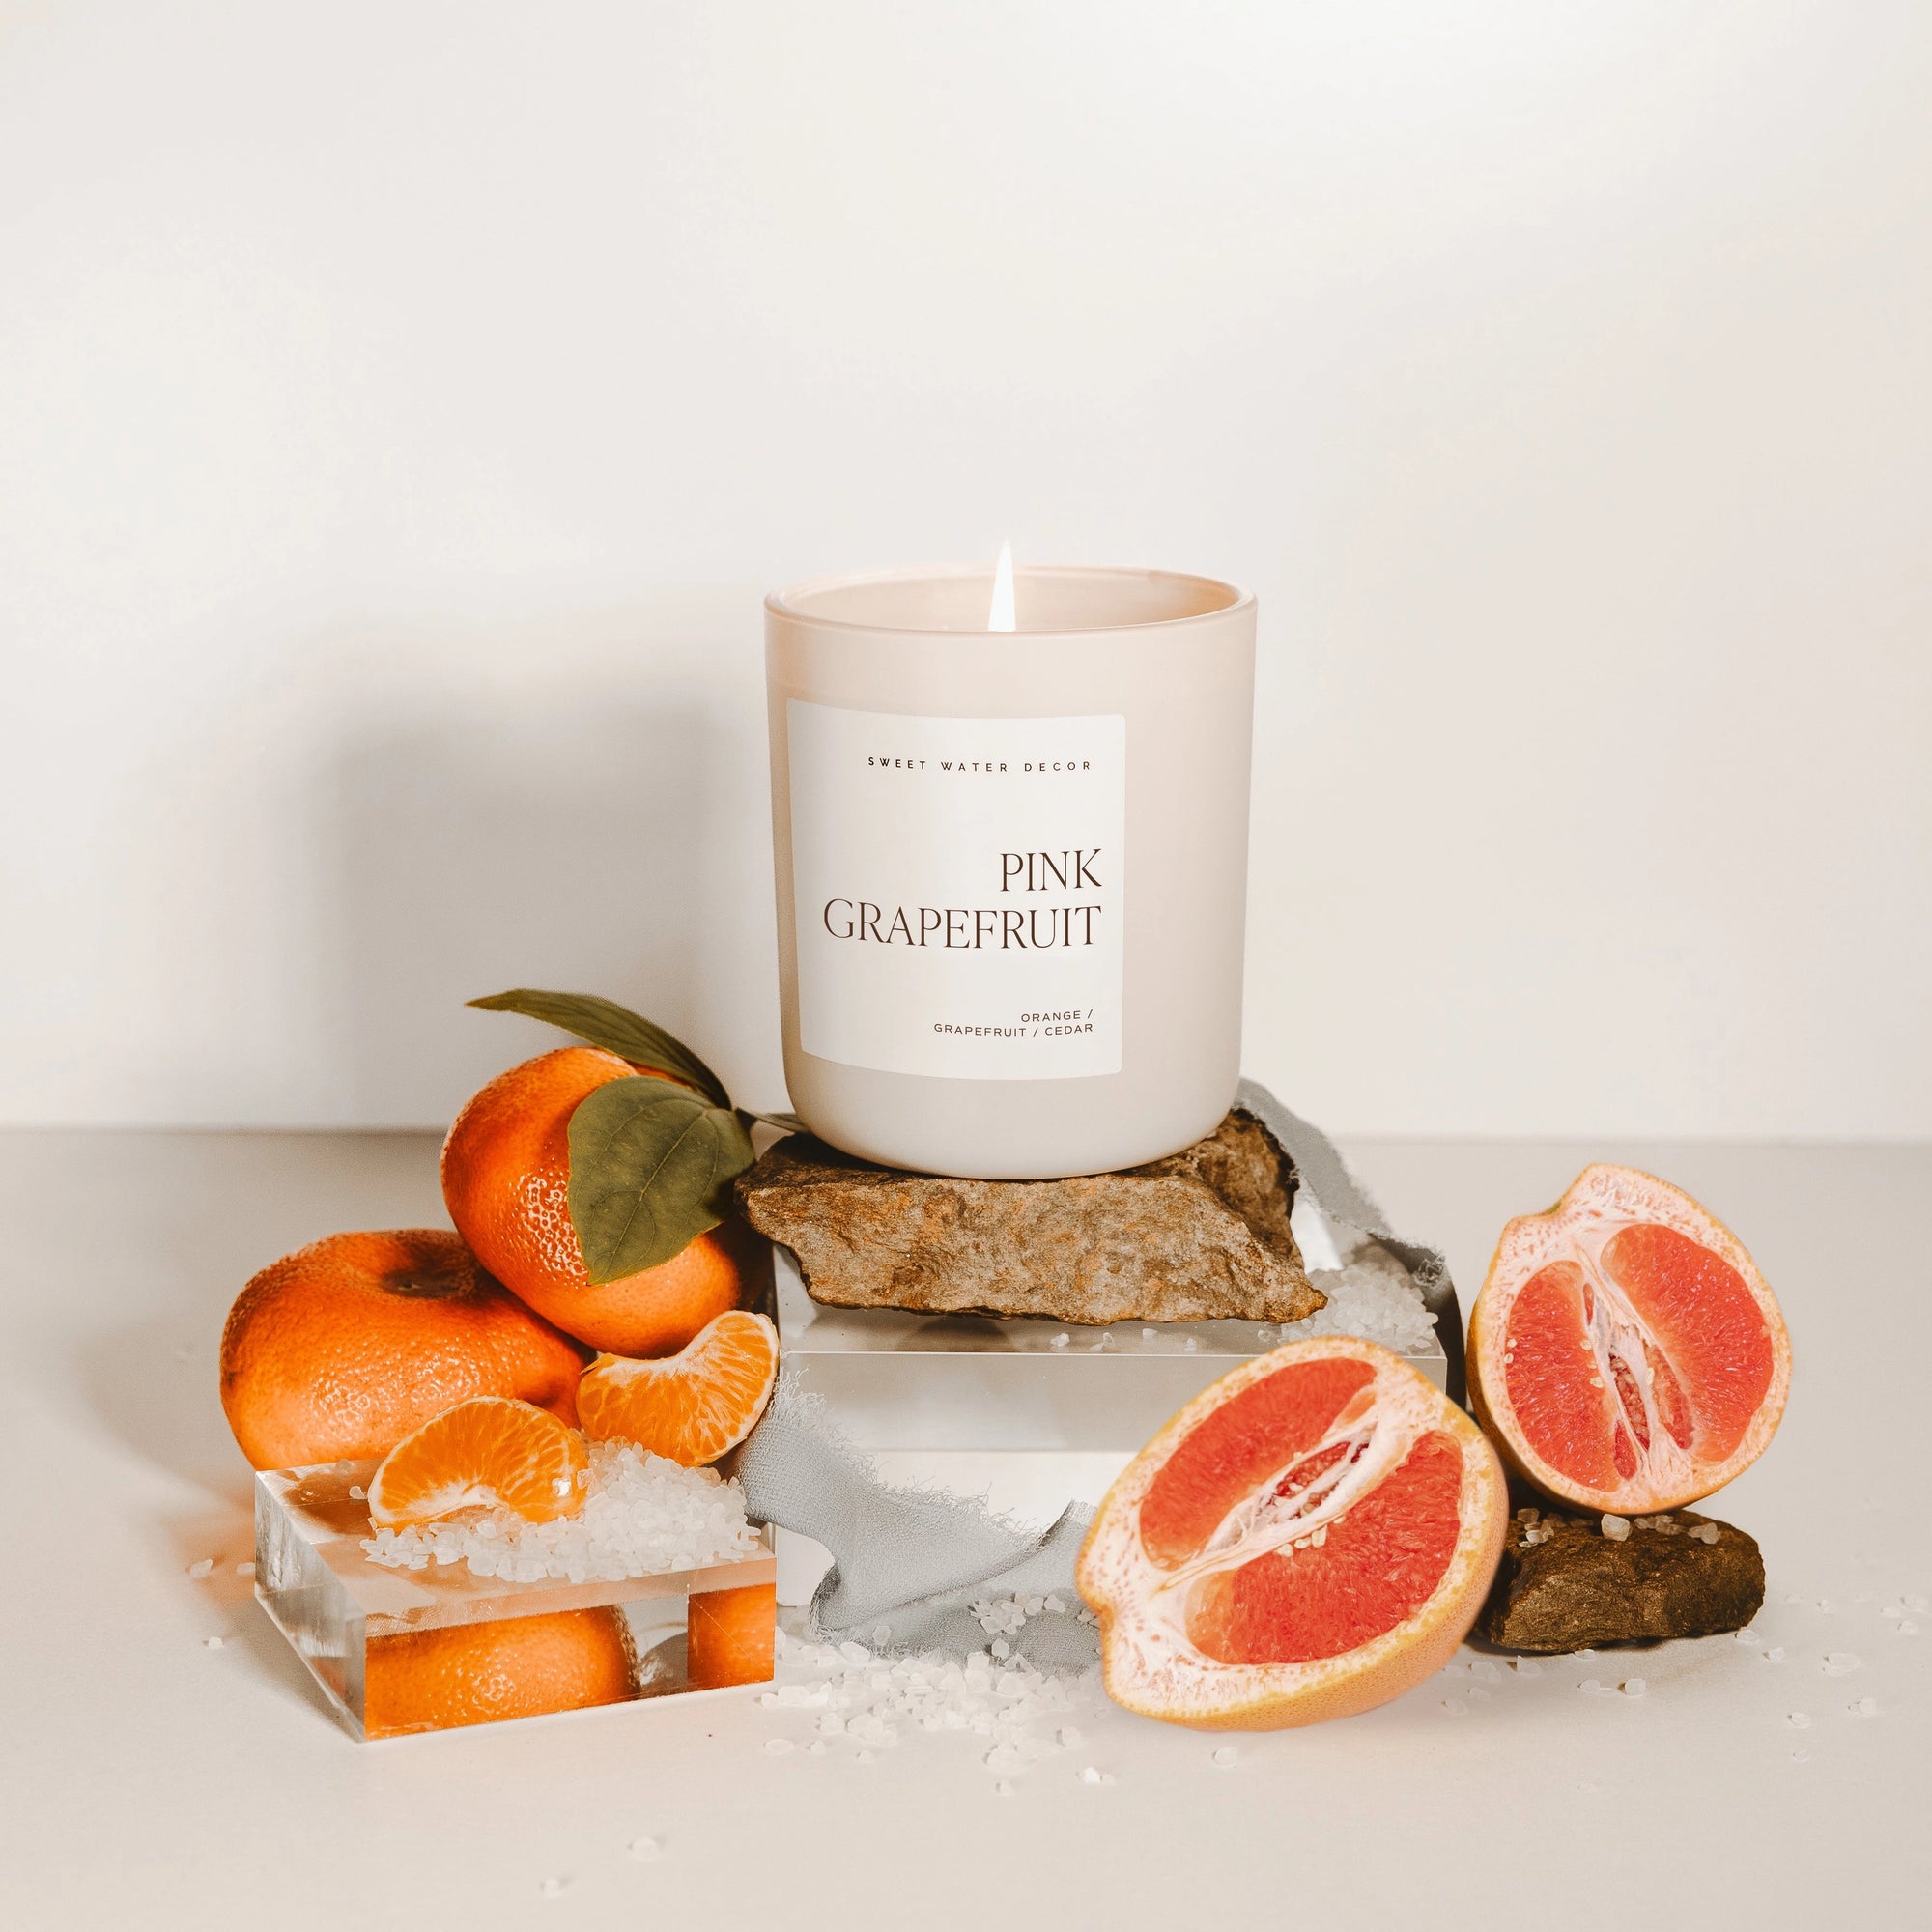 Pink grapefruit soy candle on a wood plaque, lit, surrounded by fruits and salt.